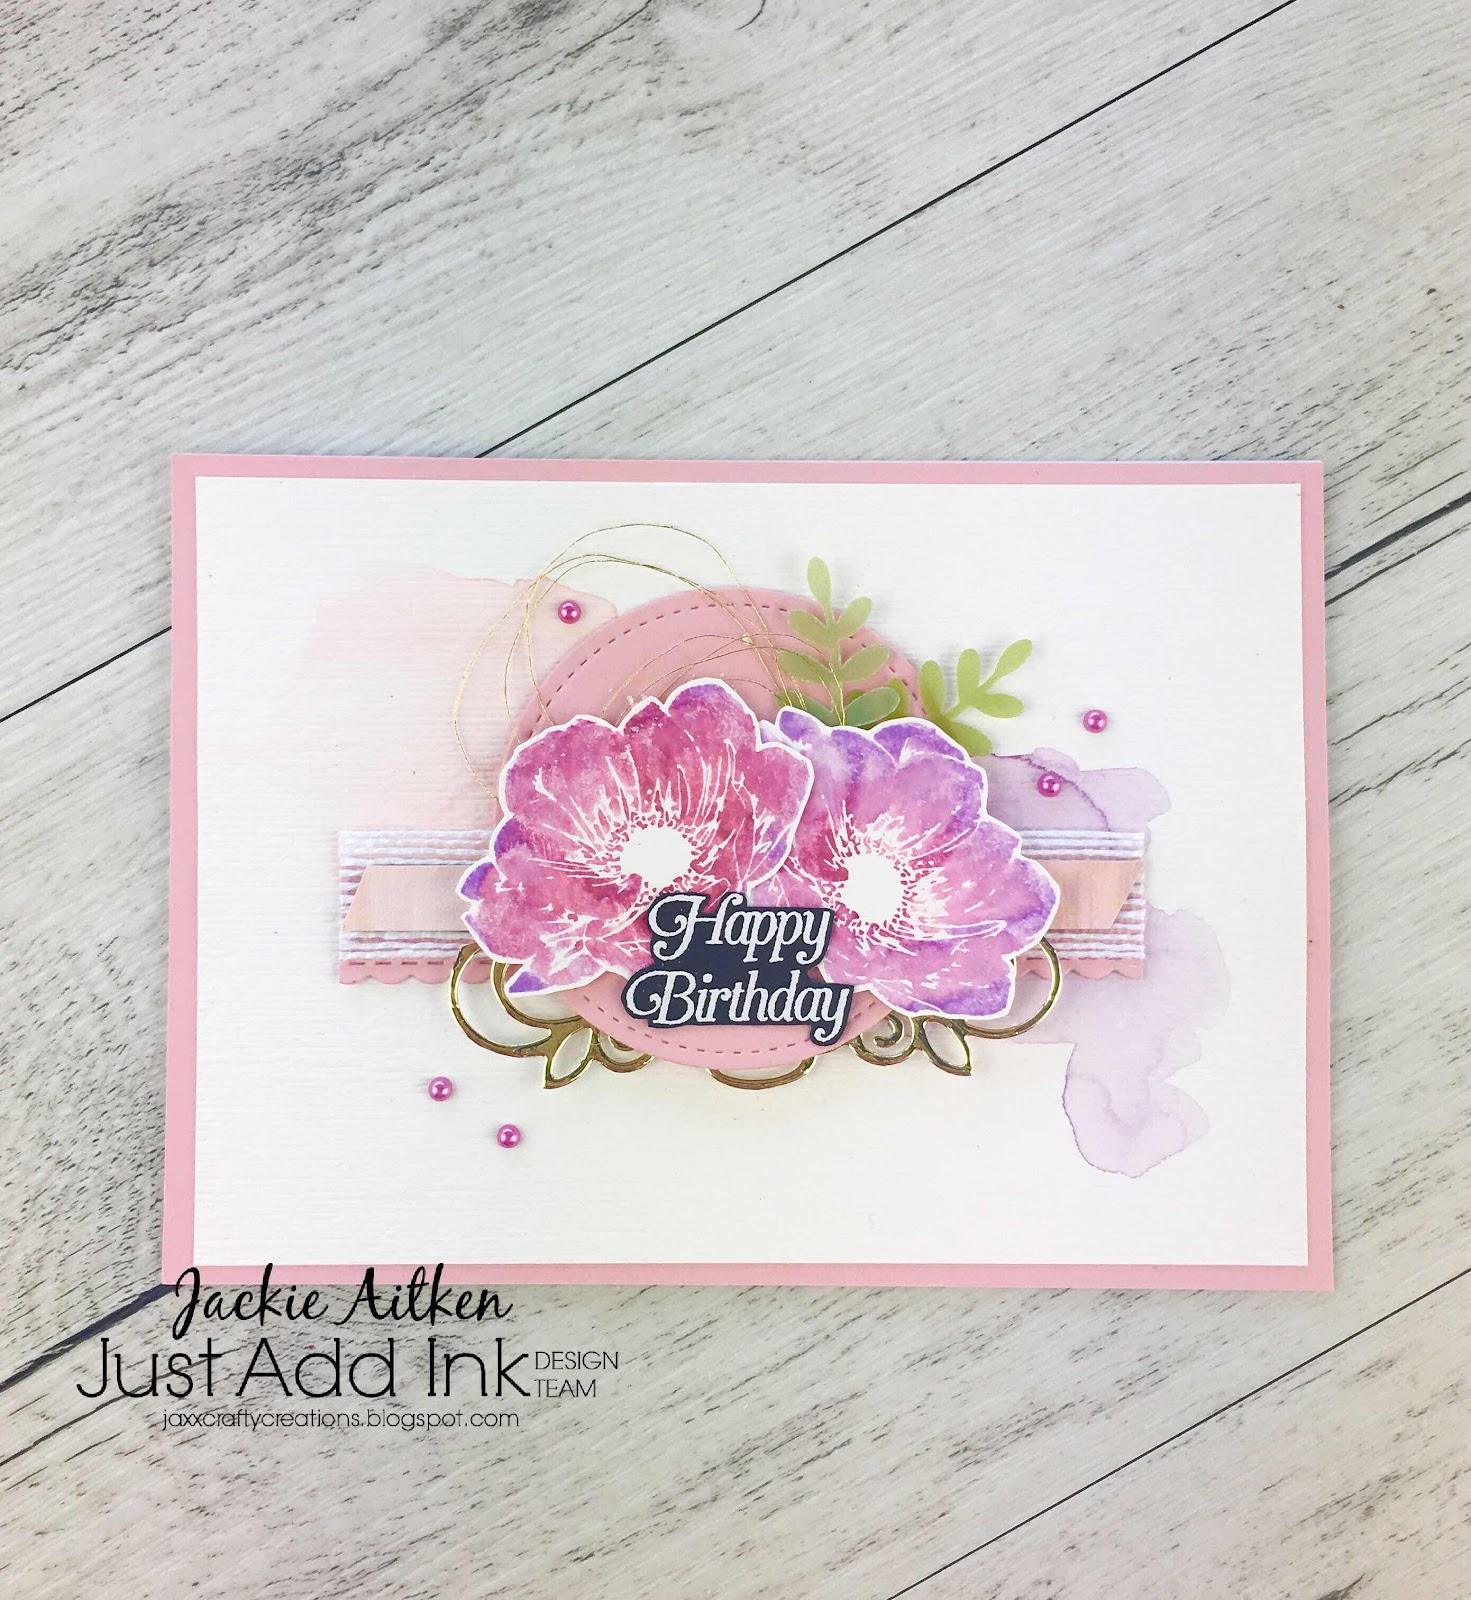 Jaxx Crafty Creations,Floral Essence, Just Add Ink Challenge, Watercolour, Birthday Card, Floral Card,